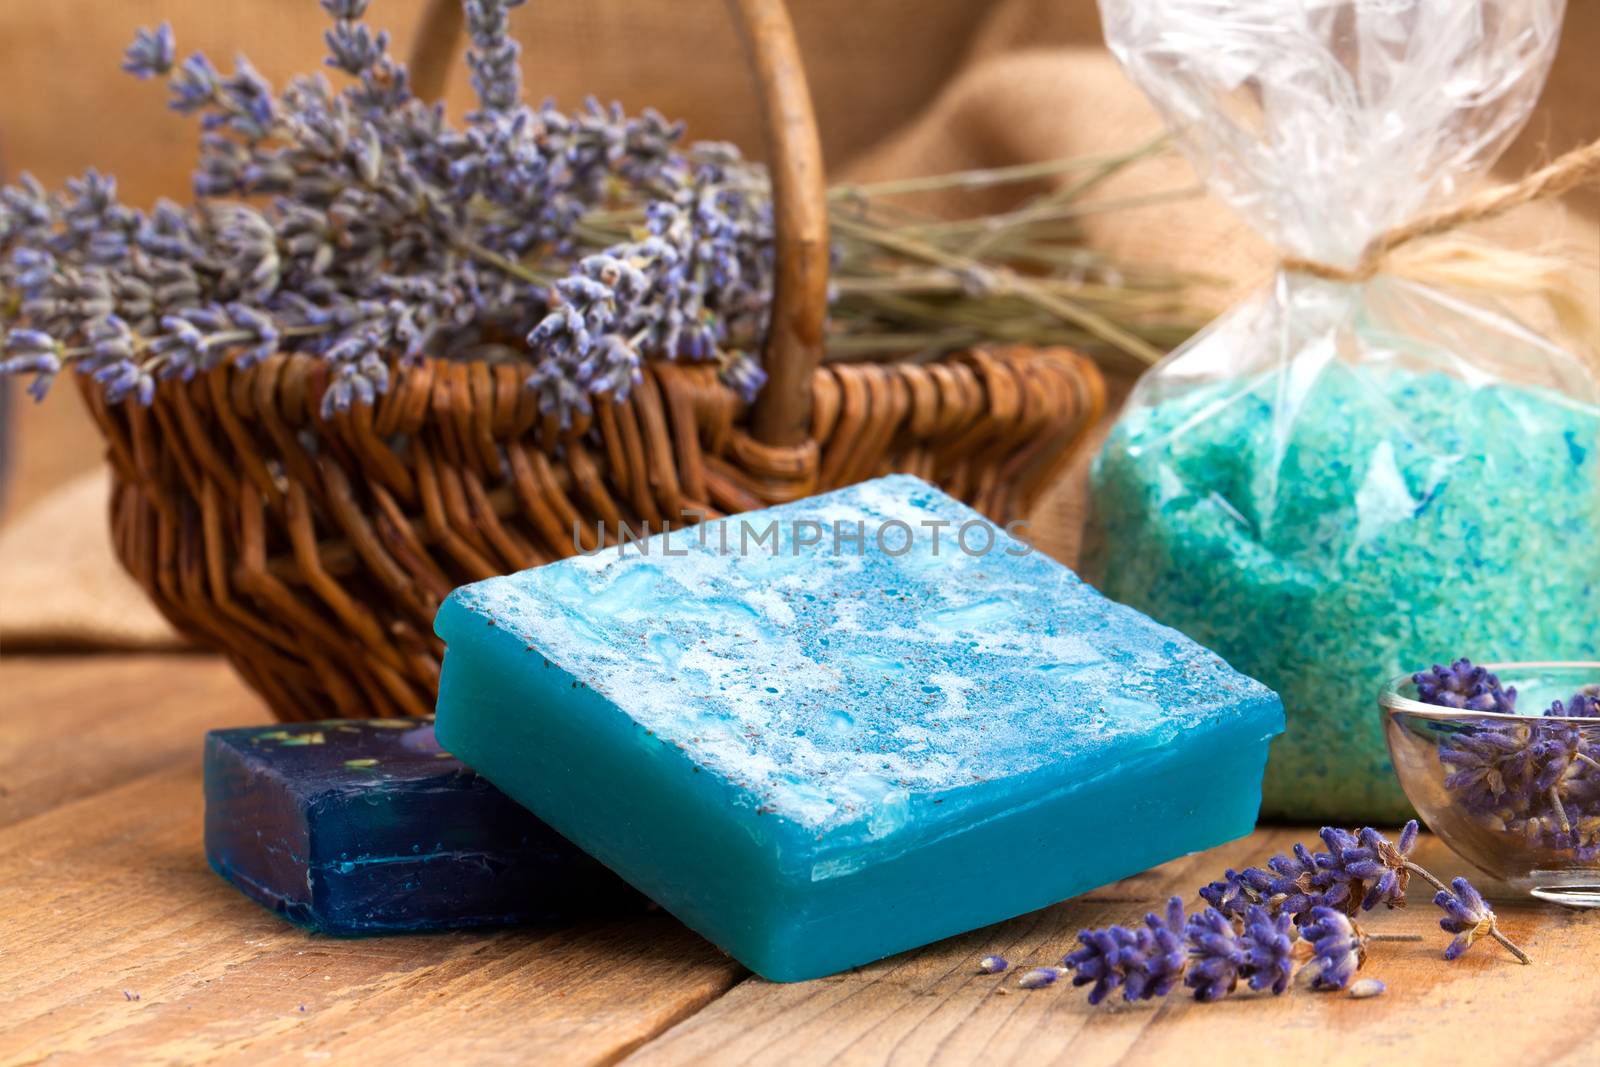 Homemade Soap with Lavender Flowers and Sea Salt by motorolka